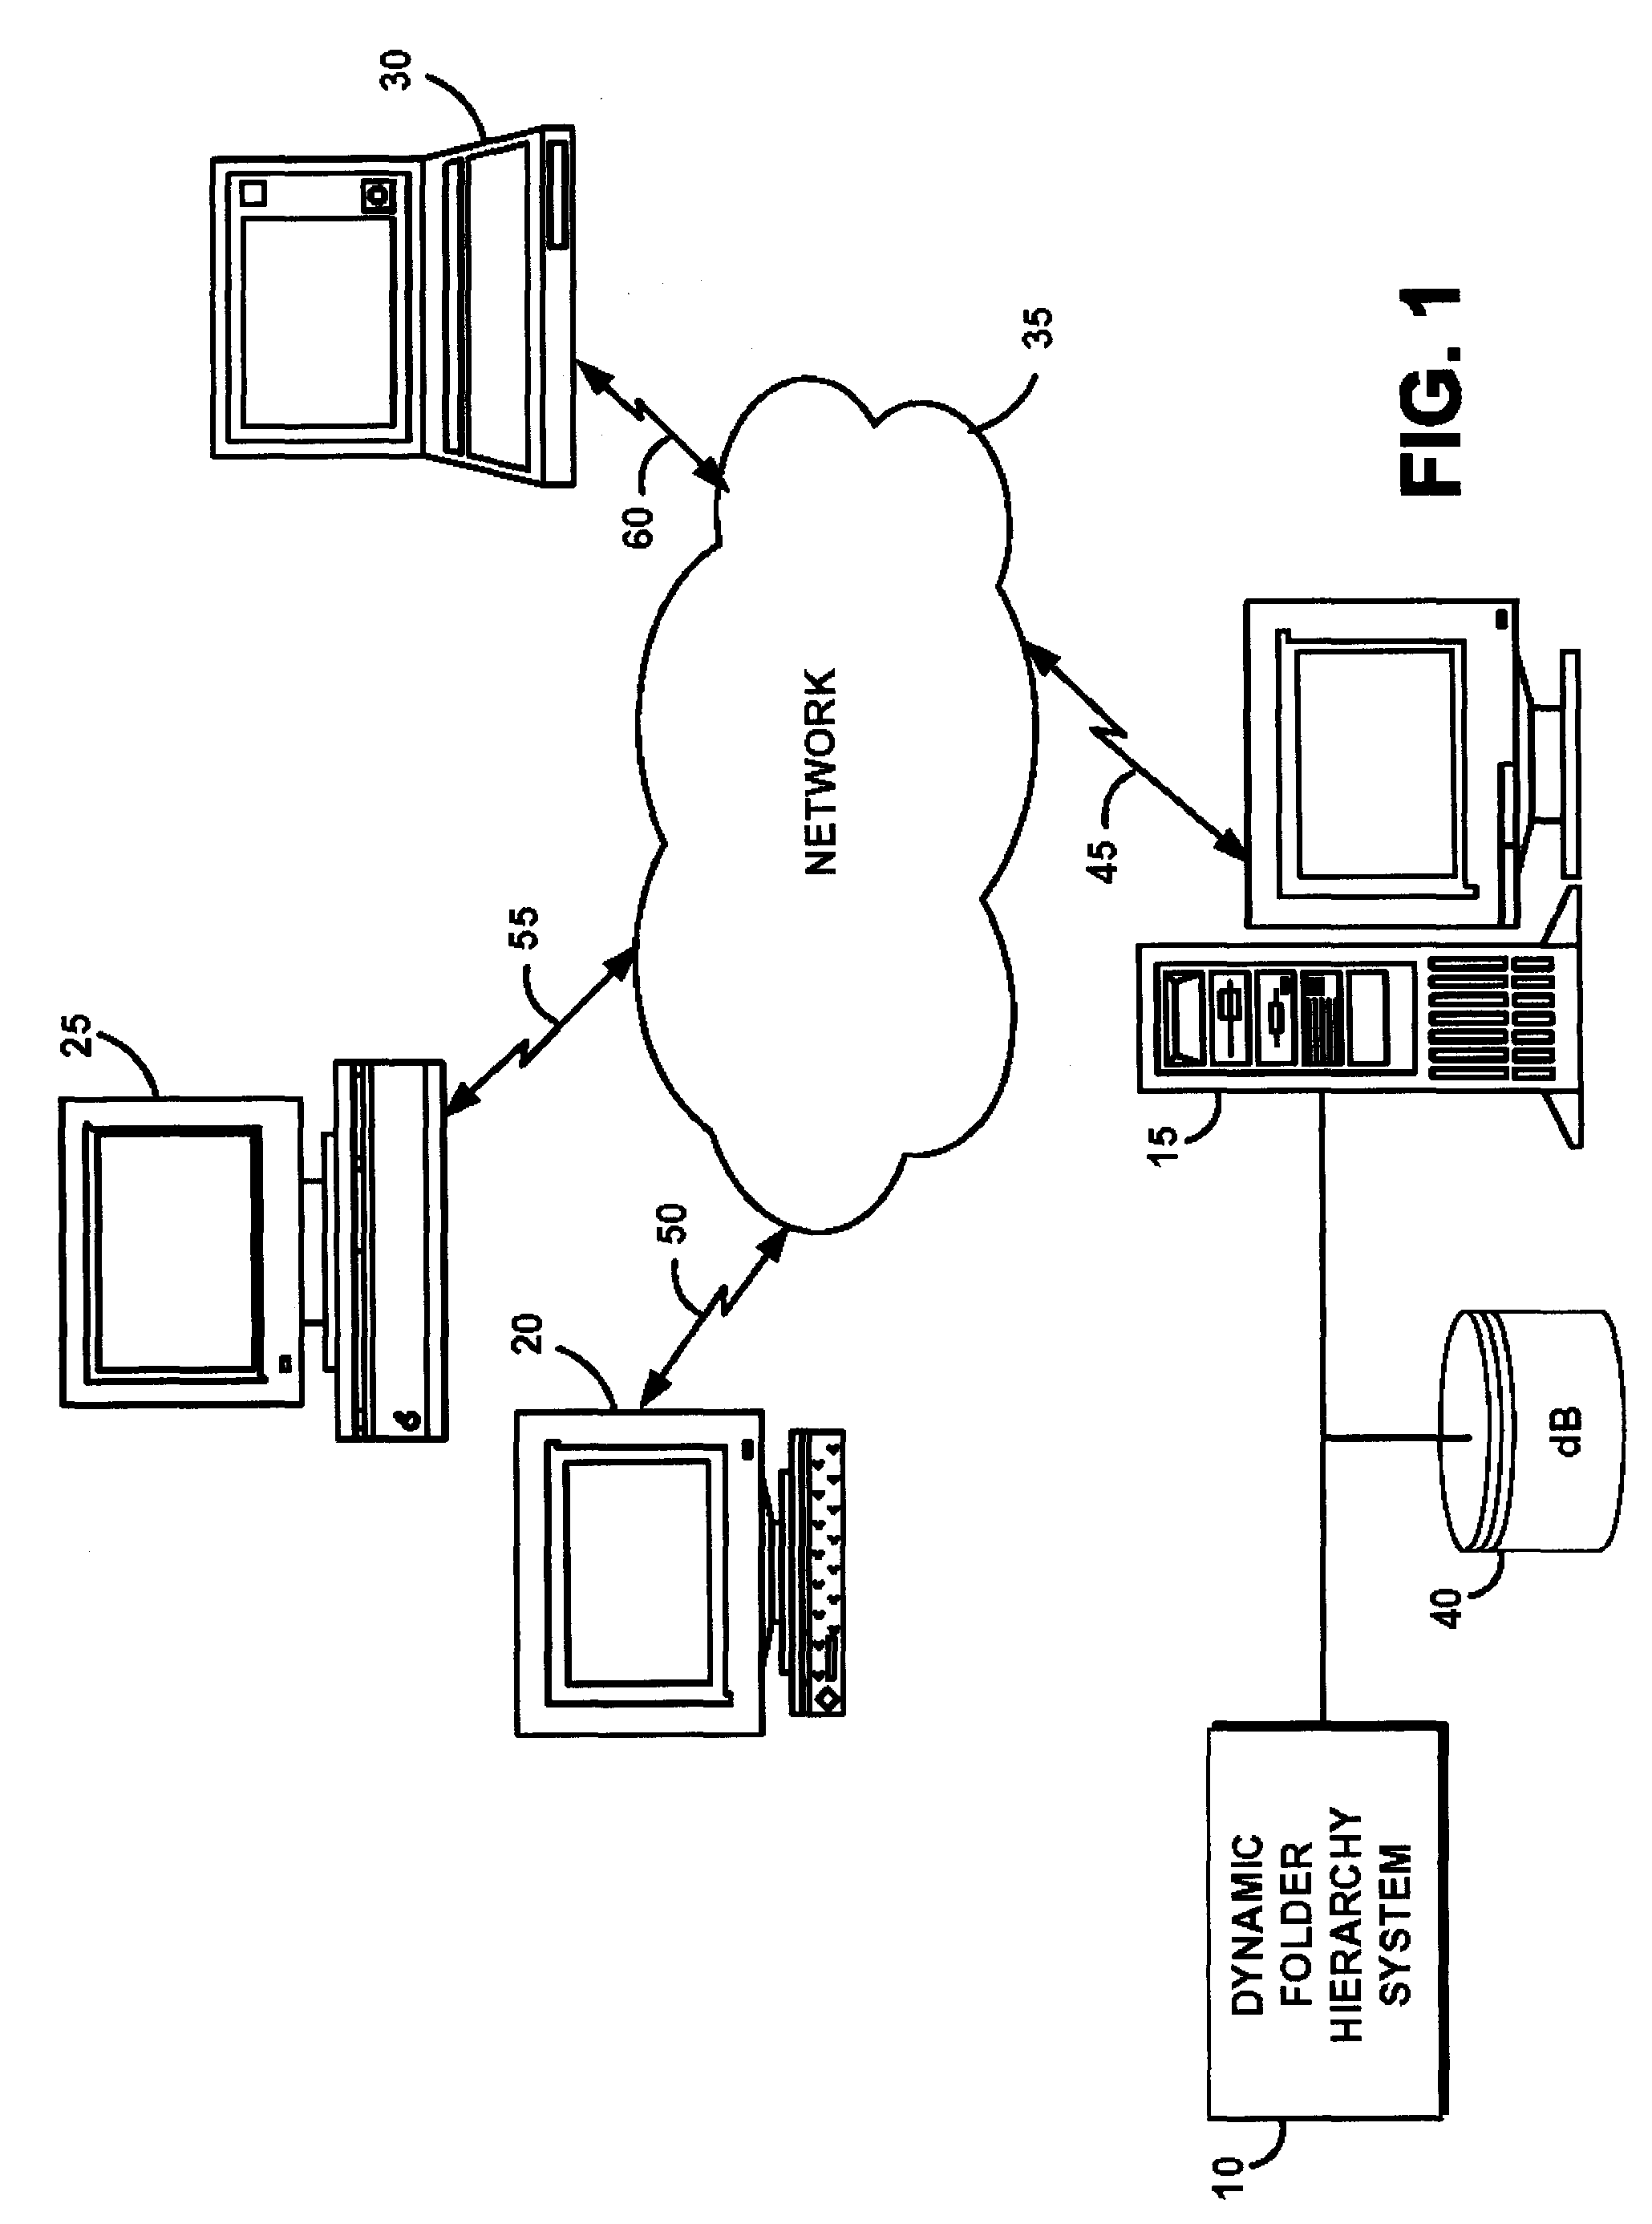 System and method for creating dynamic folder hierarchies